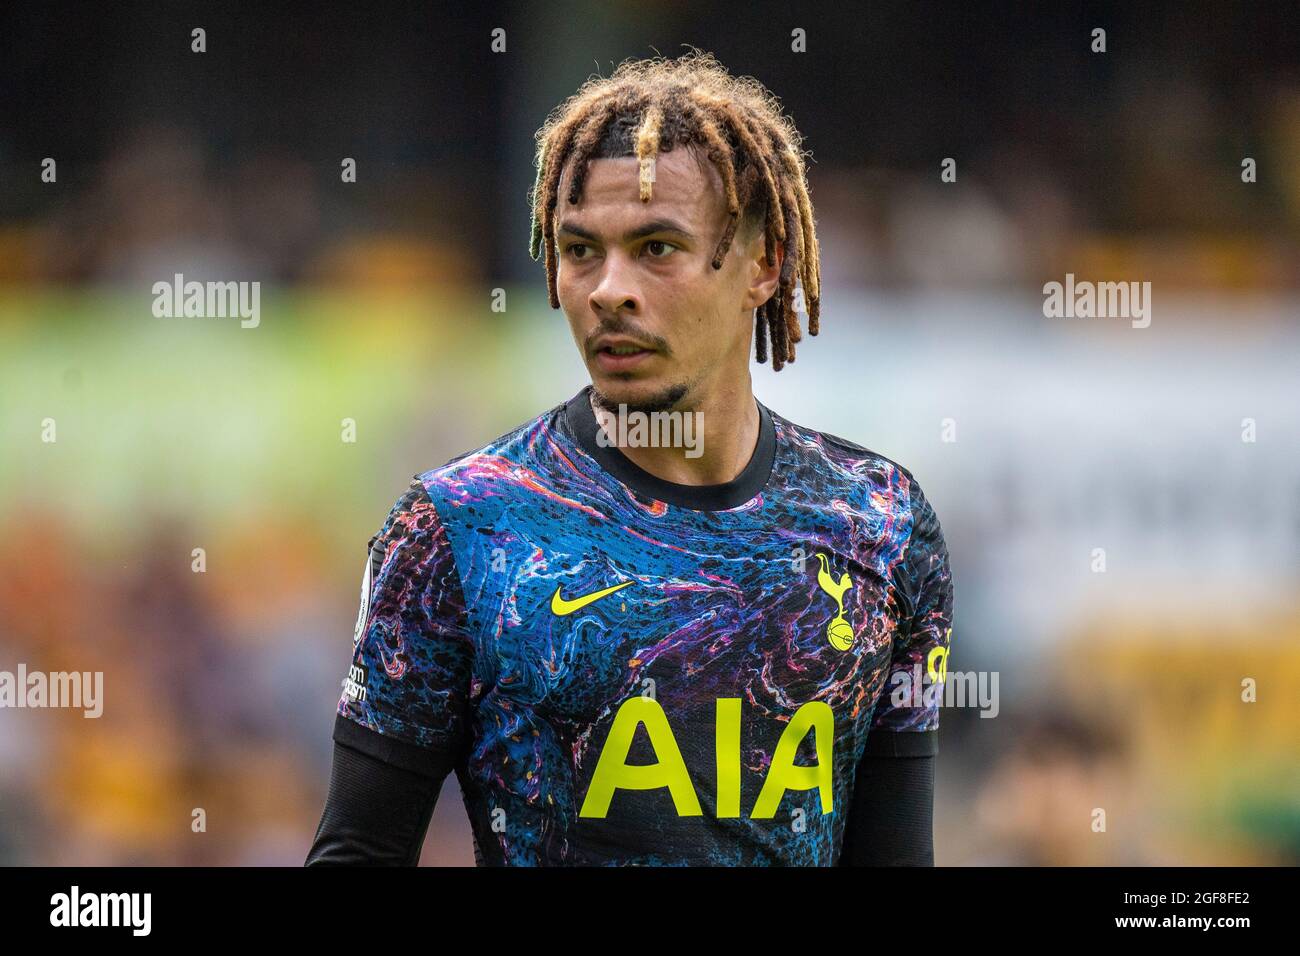 WOLVERHAMPTON, ENGLAND - AUGUST 22: Dele Alli of Tottenham during the  Premier League match between Wolverhampton Wanderers and Tottenham Hotspur  at Stock Photo - Alamy